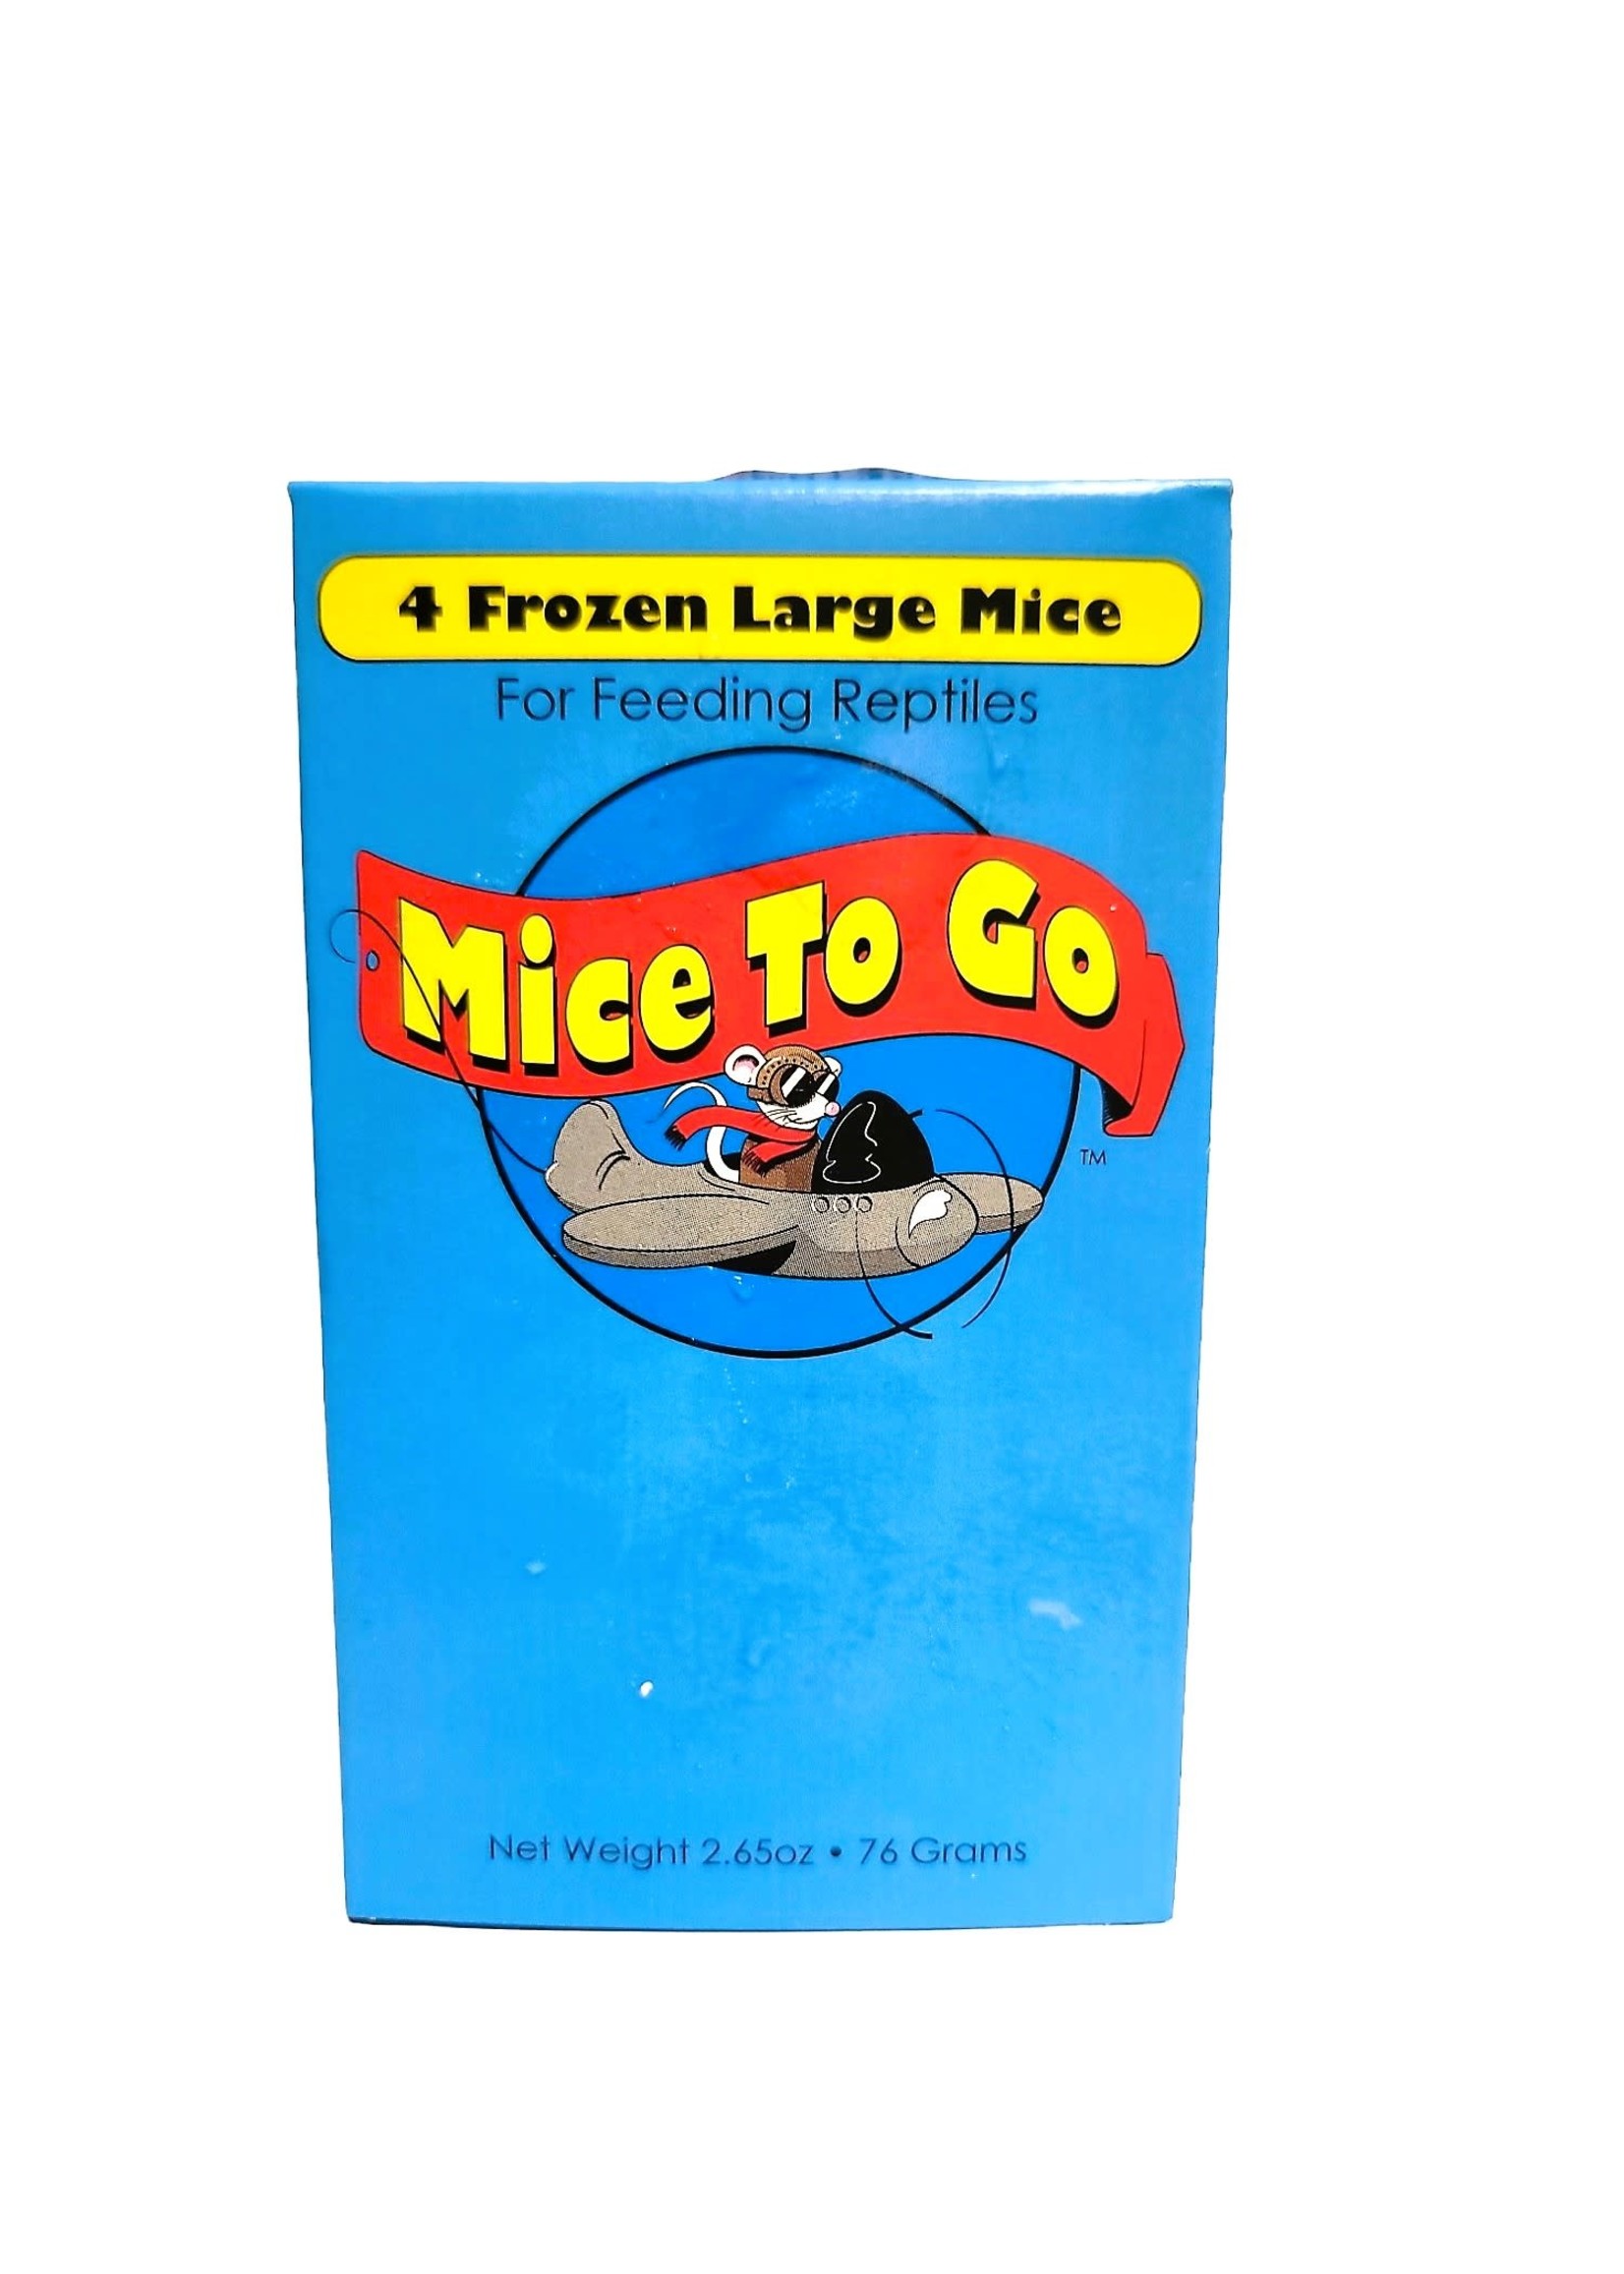 Mice to Go Frozen Large Mice 4 Pack